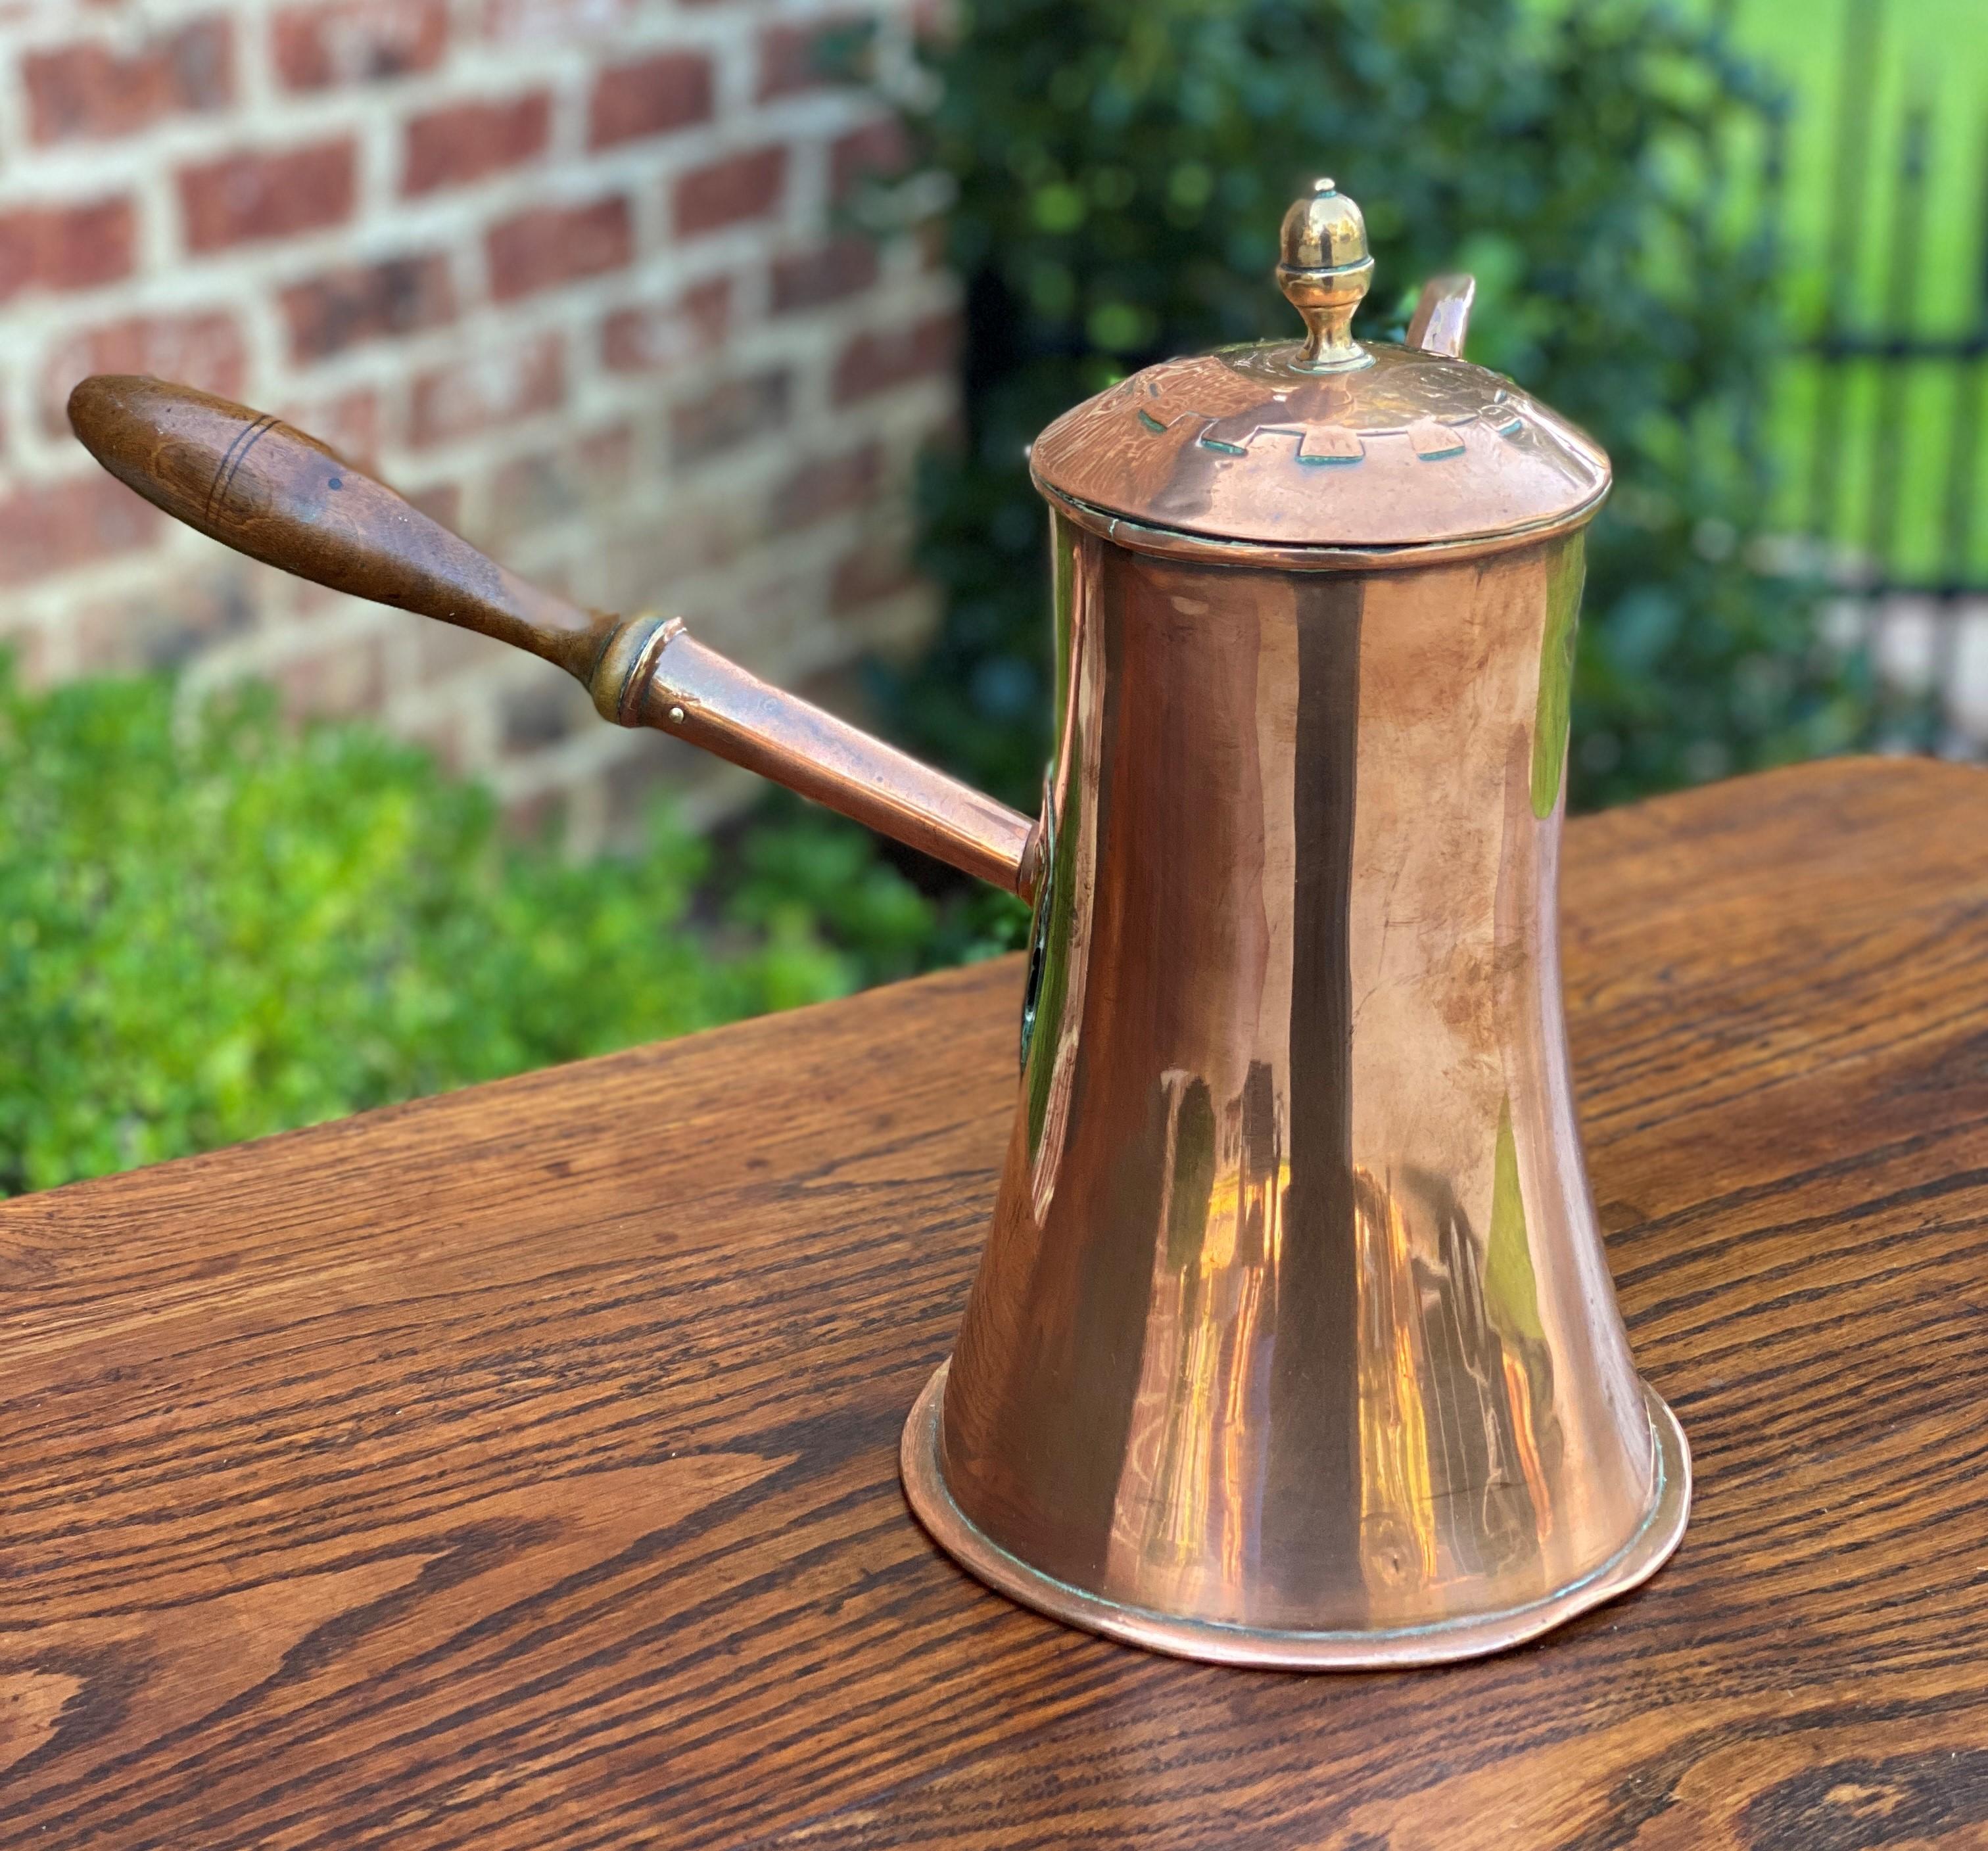 Beautiful and unique antique English copper tea or coffee kettle with pour spout, hinged lid, and wood handle~~hand-seamed~~c. 1900

Measures: 9